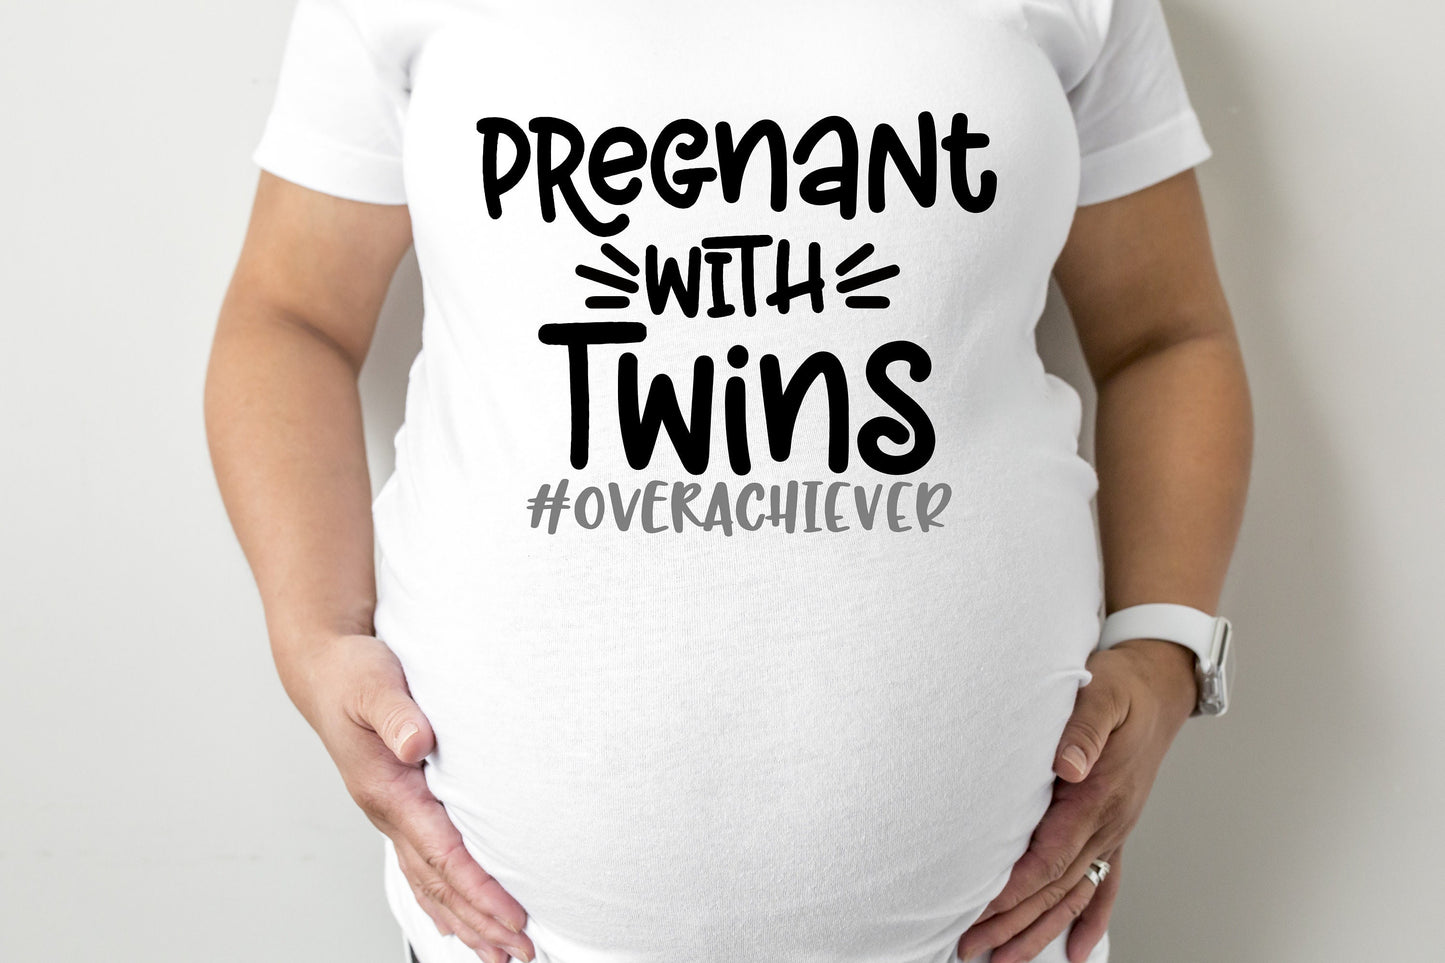 Pregnant With Twins Overachiever Maternity T-Shirt - maternity cut shirt with ruched sides - pregnancy announcement - funny maternity tee